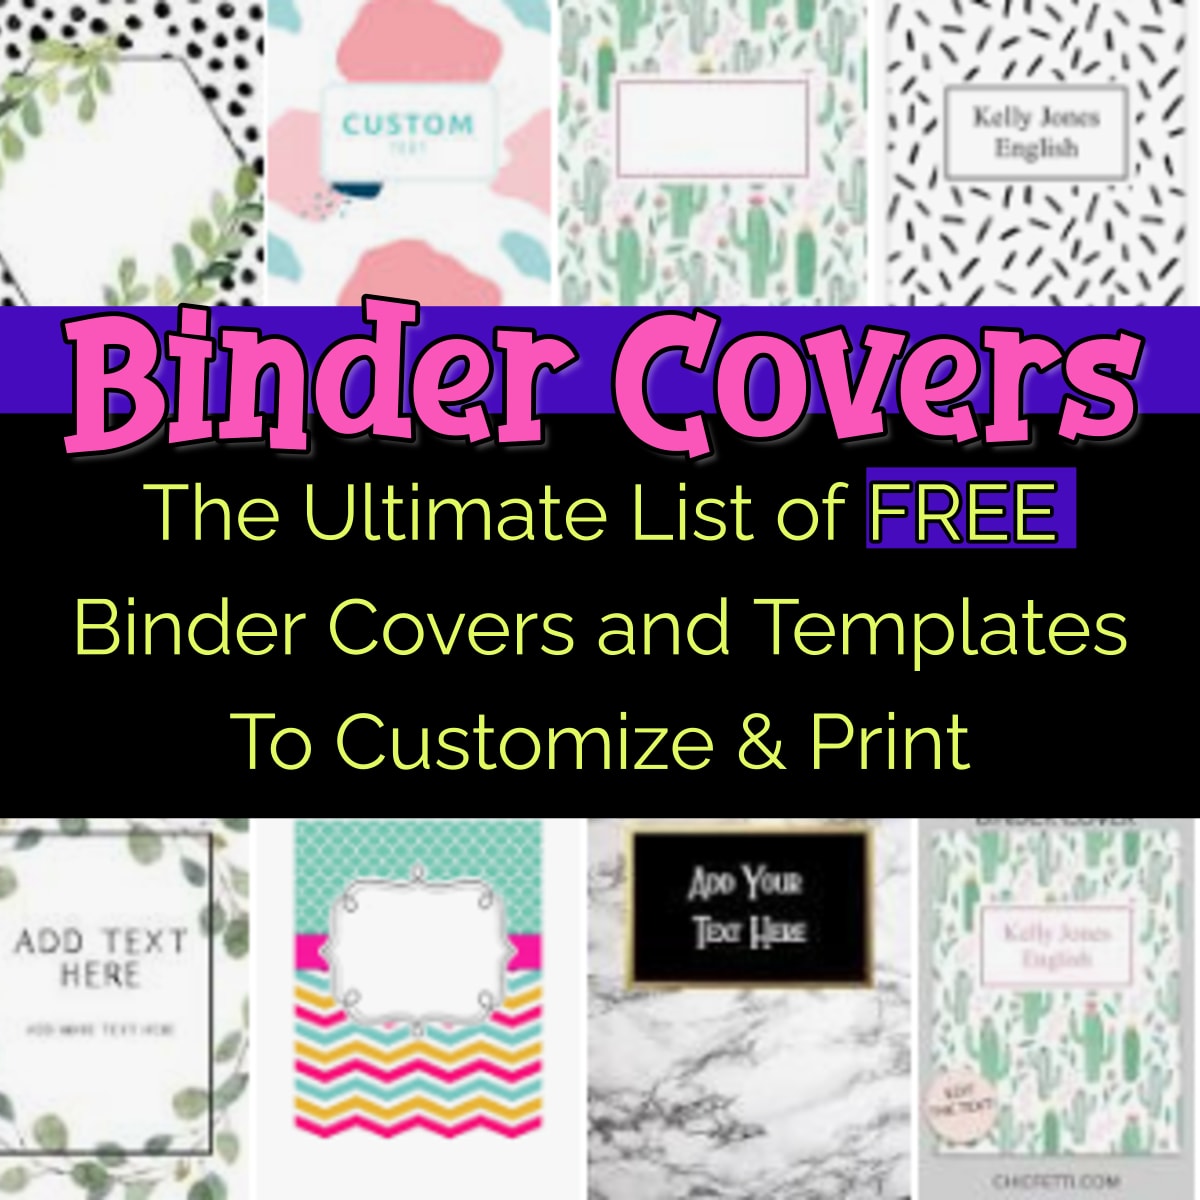 Binder Covers-Free Printable Binder Covers and Templates to Print - Binder Covers for school, Cute Binder Covers, Editable Binder Covers DIY, Black and White, Simple Professional and Business, binder covers for teachers and more free printable binder covers